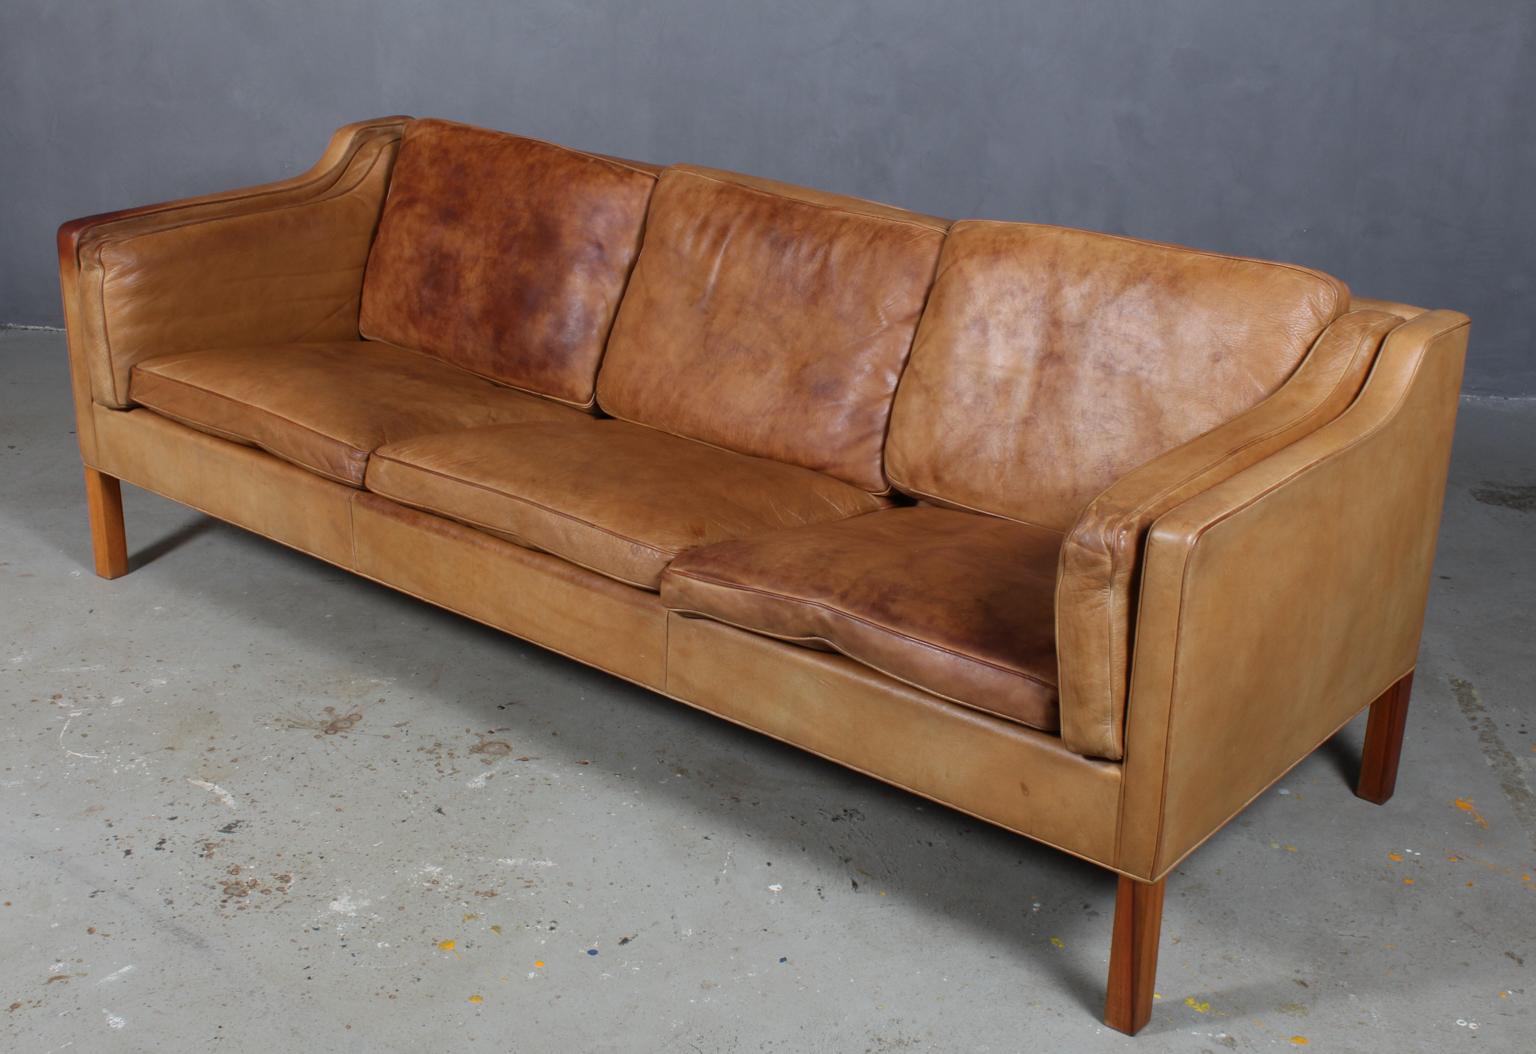 Børge Mogensen three-seat sofa with original patinated nature upholstery.

Legs of mahogany.

Model 2213, made by Fredericia Furniture.